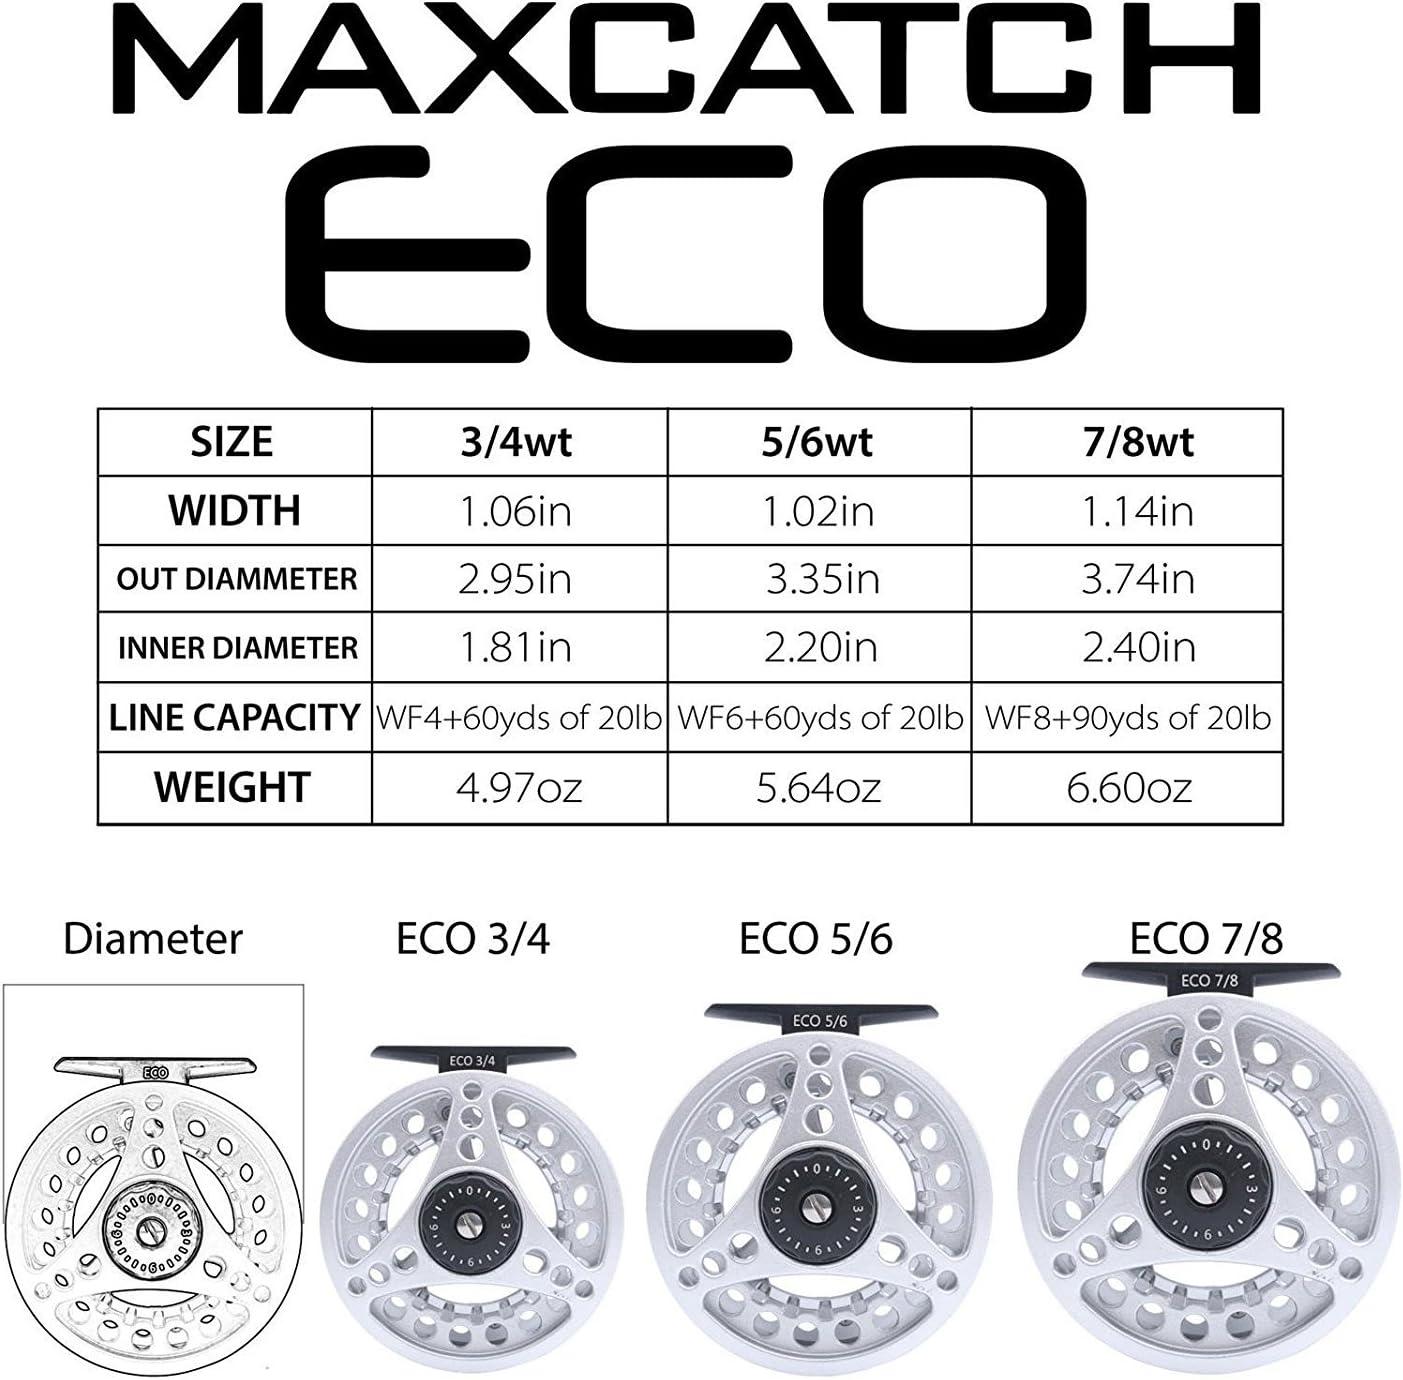 Maxcatch ECO Pre-loaded Fly Fishing Reel Diecast Aluminum Body